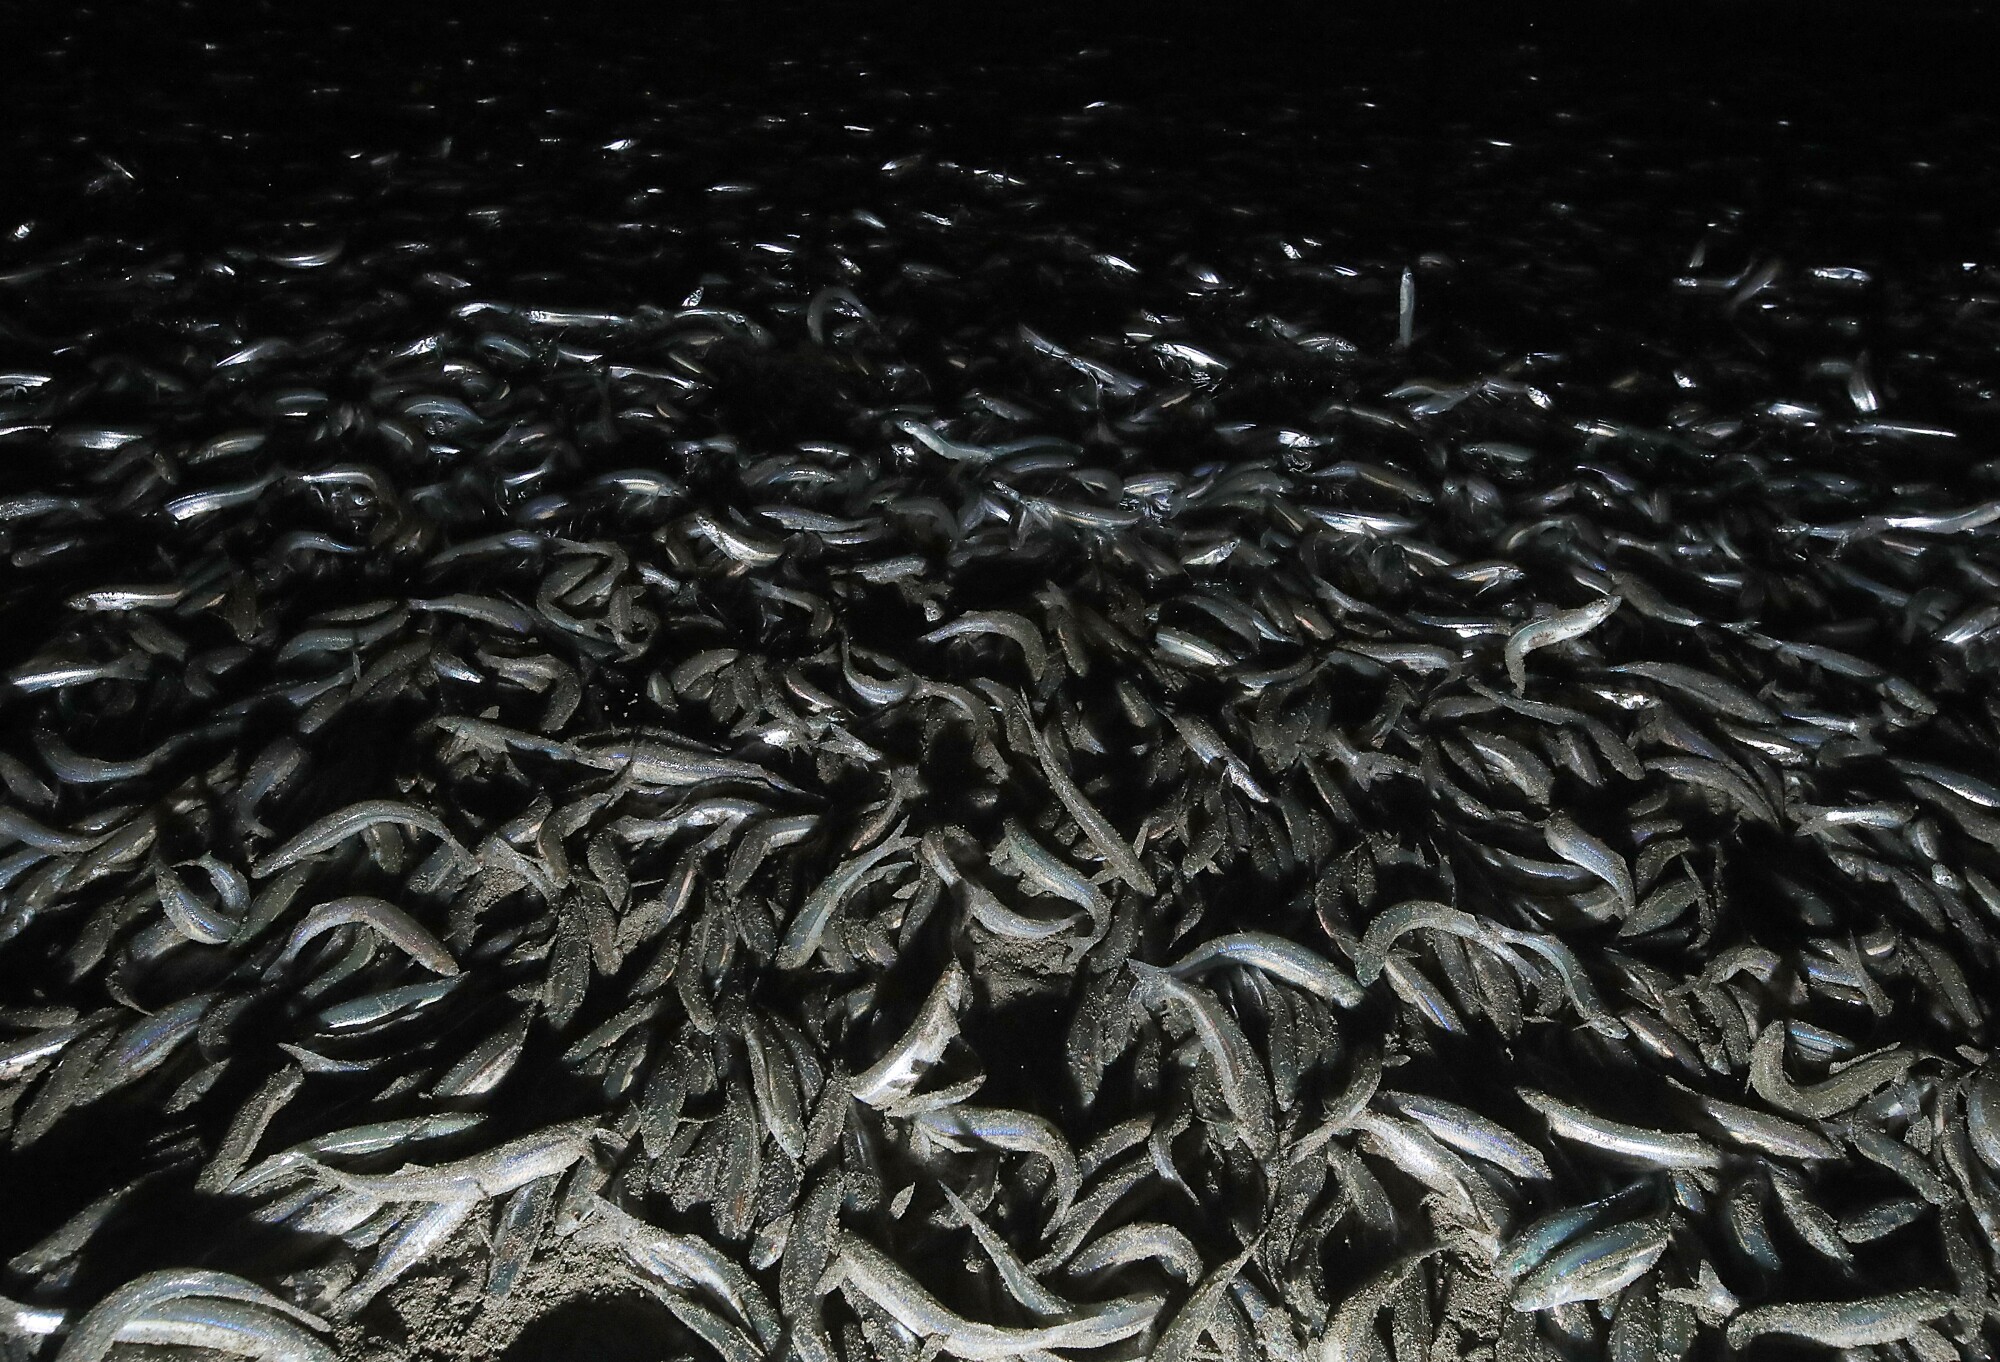 A lot of grunion washed ashore